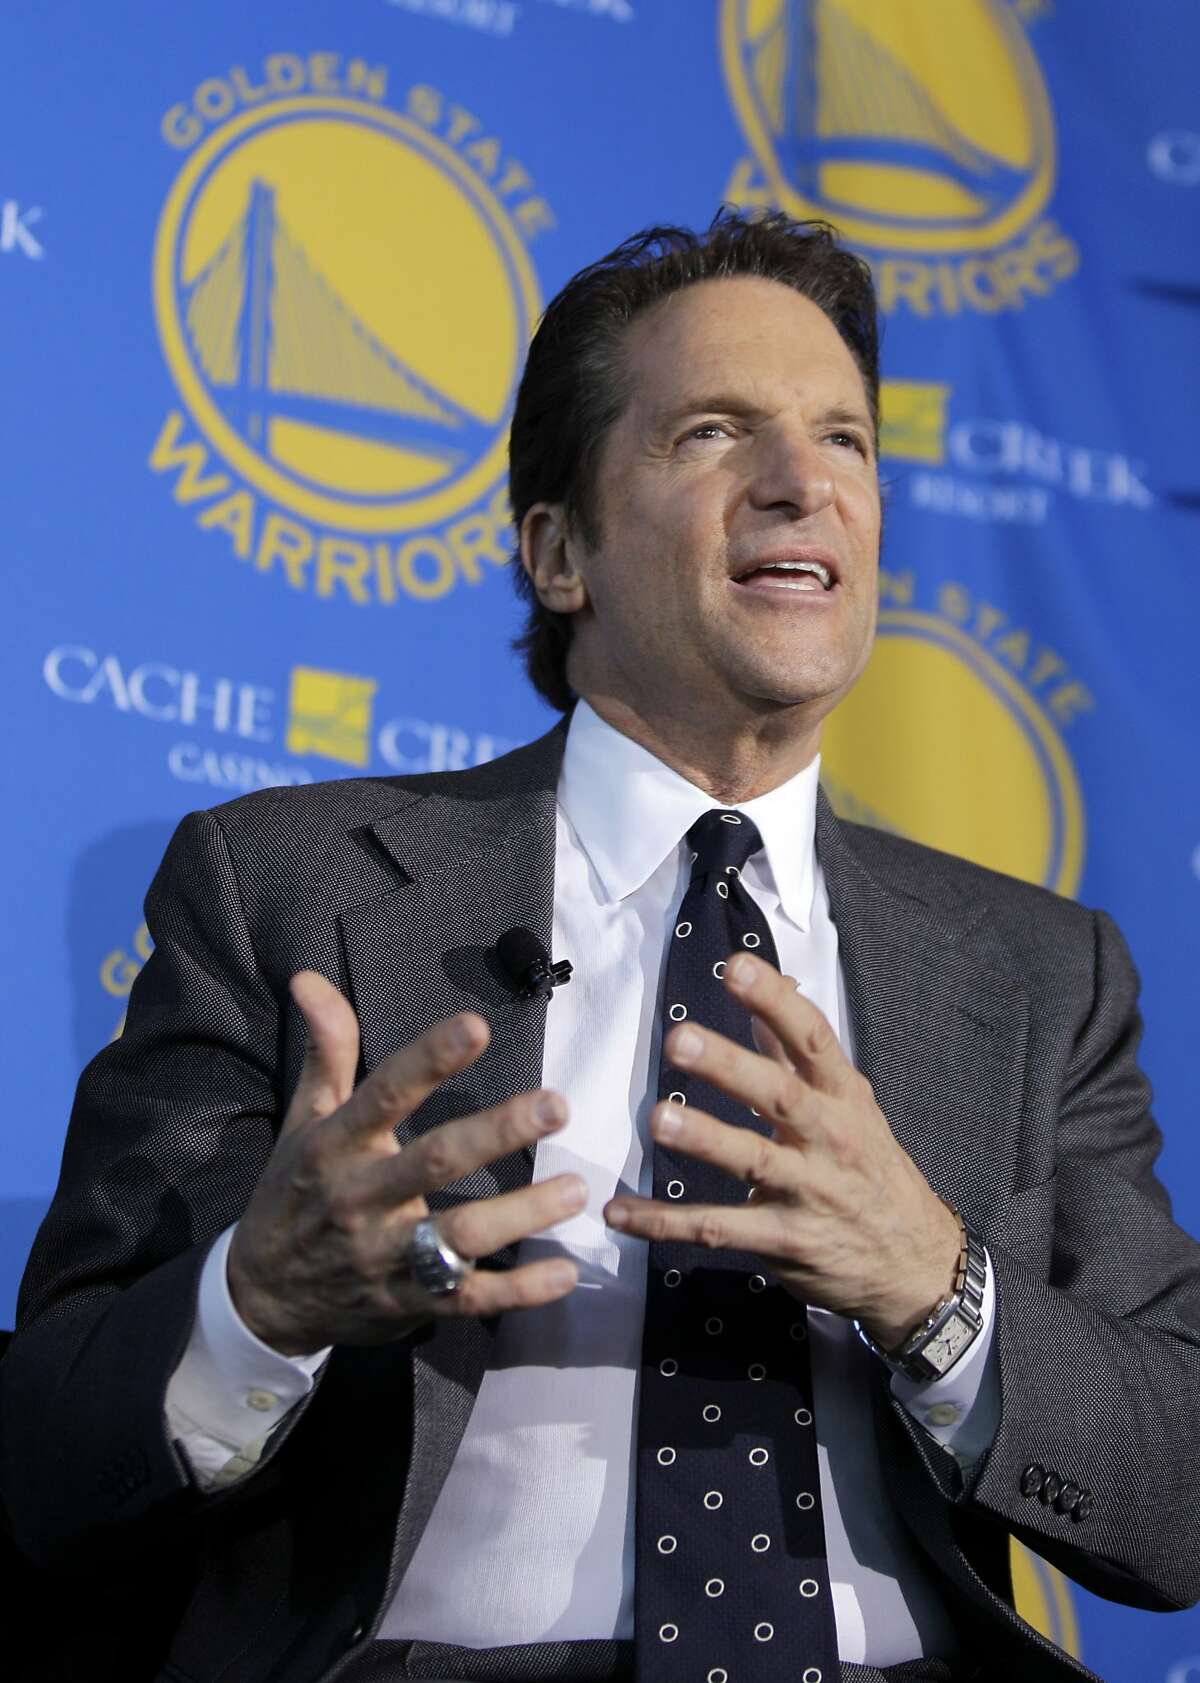 Golden State Warriors owner Peter Guber, gestures at a luncheon in San Francisco.